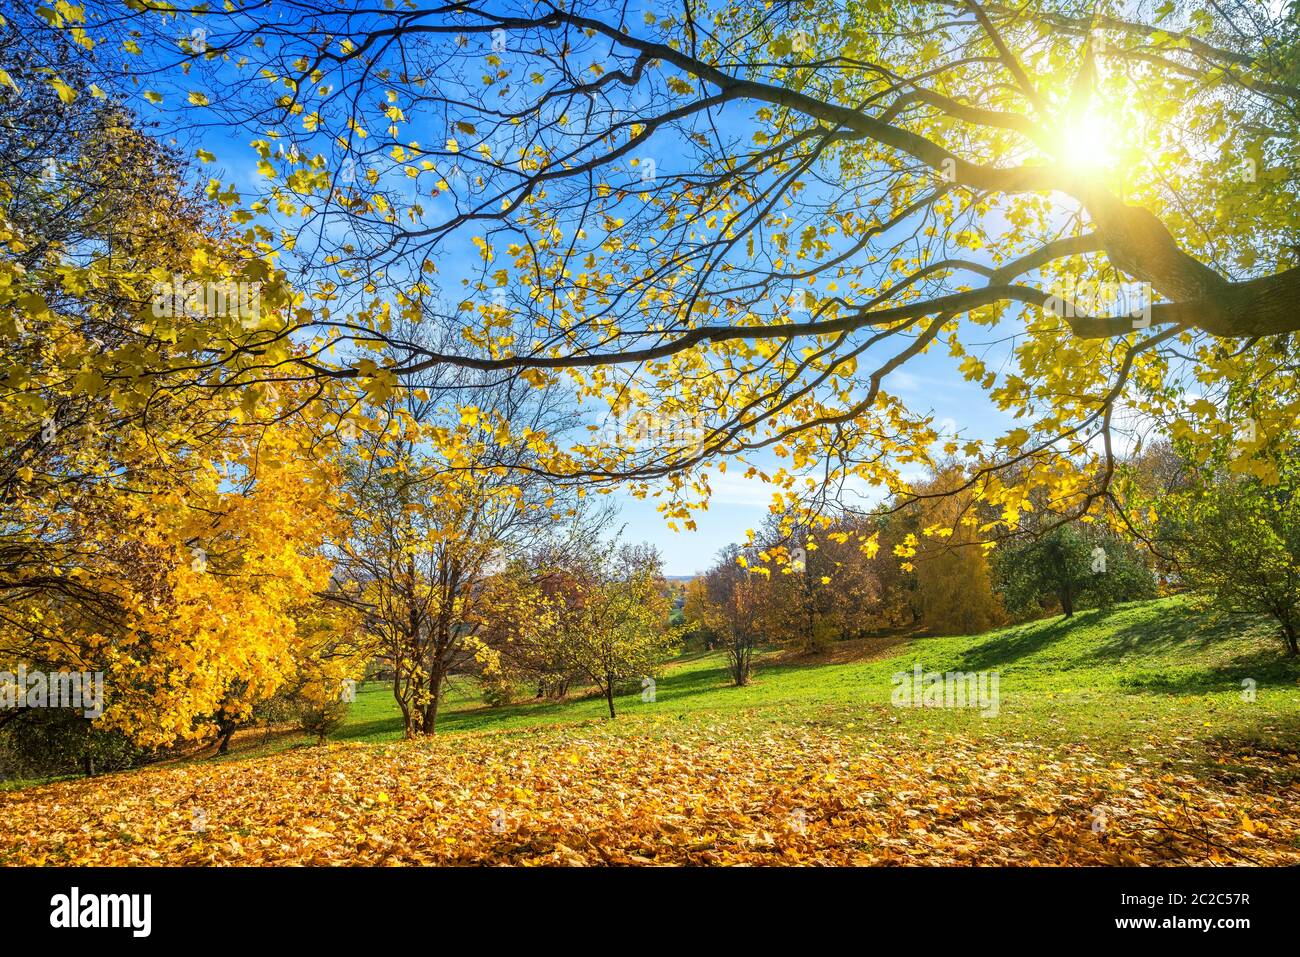 Sunny autumn landscape with golden trees and blue sky in countryside Stock Photo